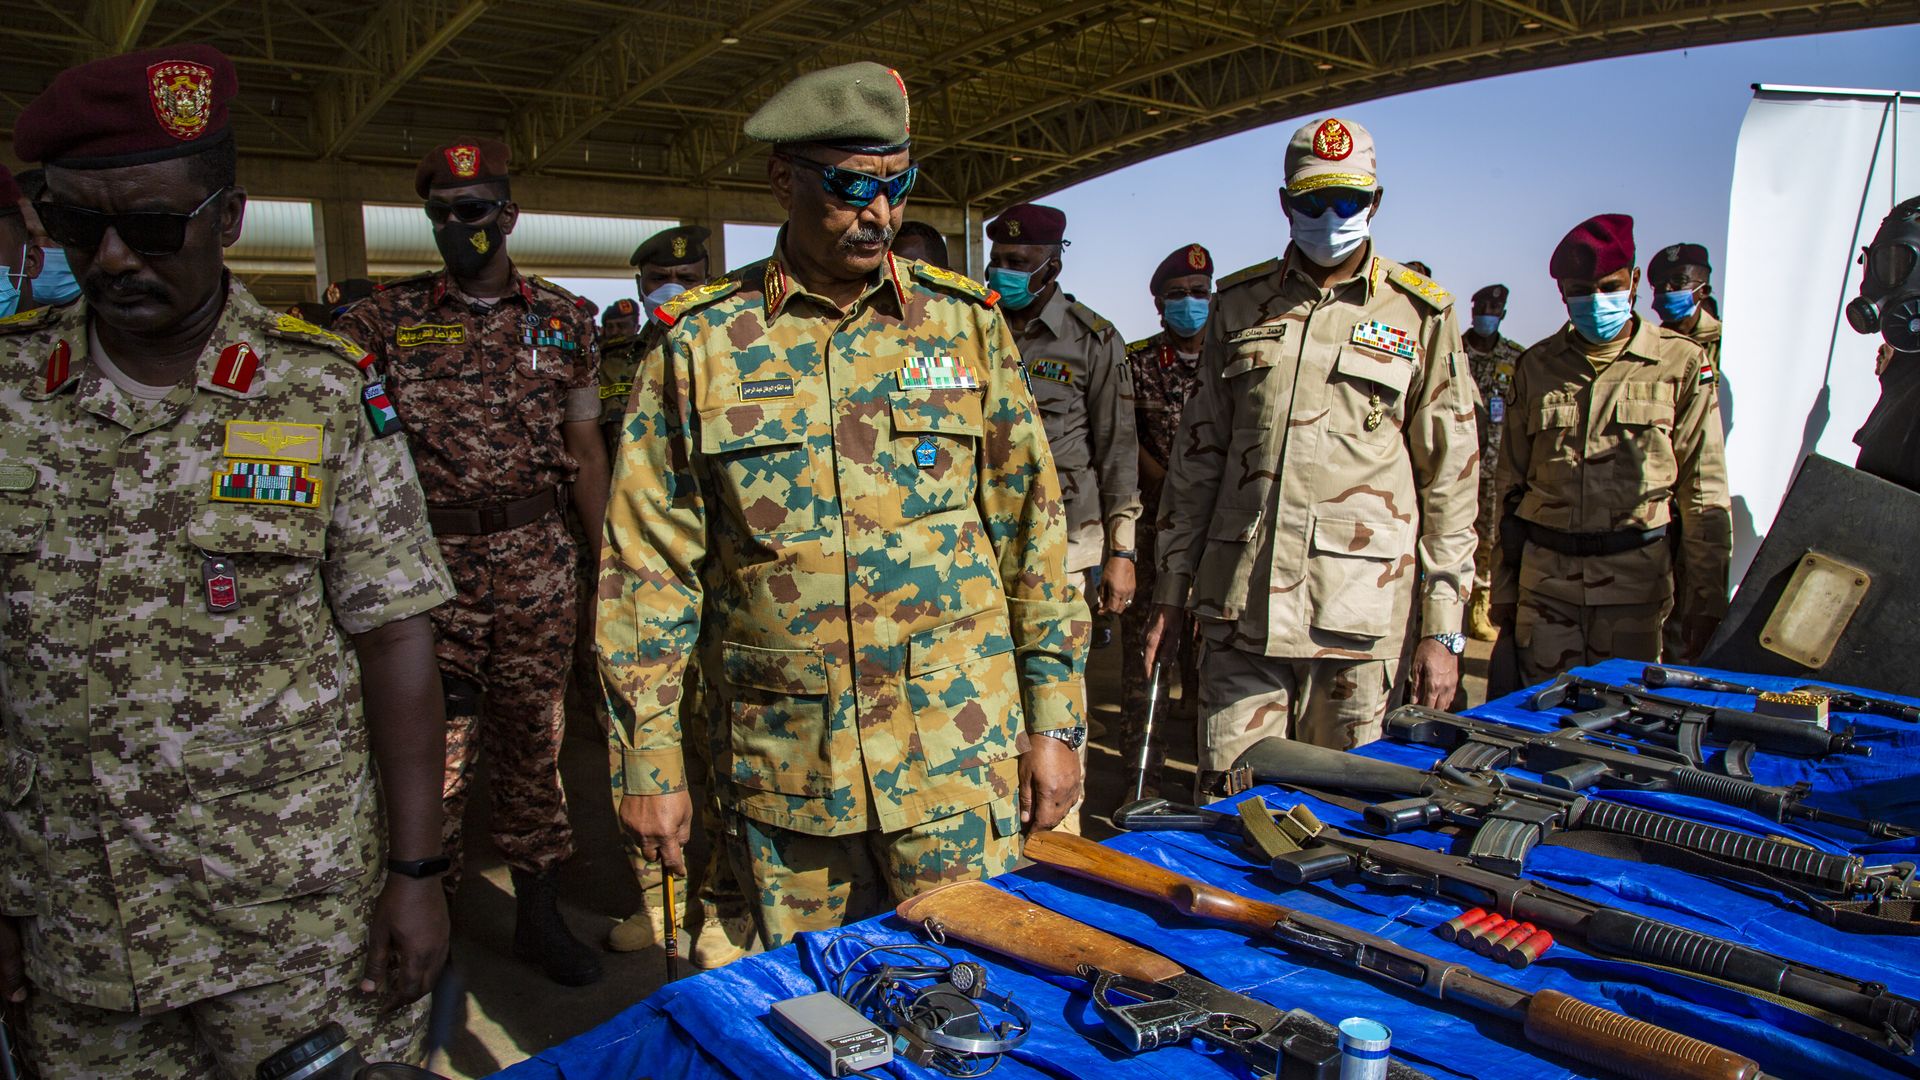 Chairman of the Sovereignty Council of Sudan attend a military graduation ceremony of special forces.